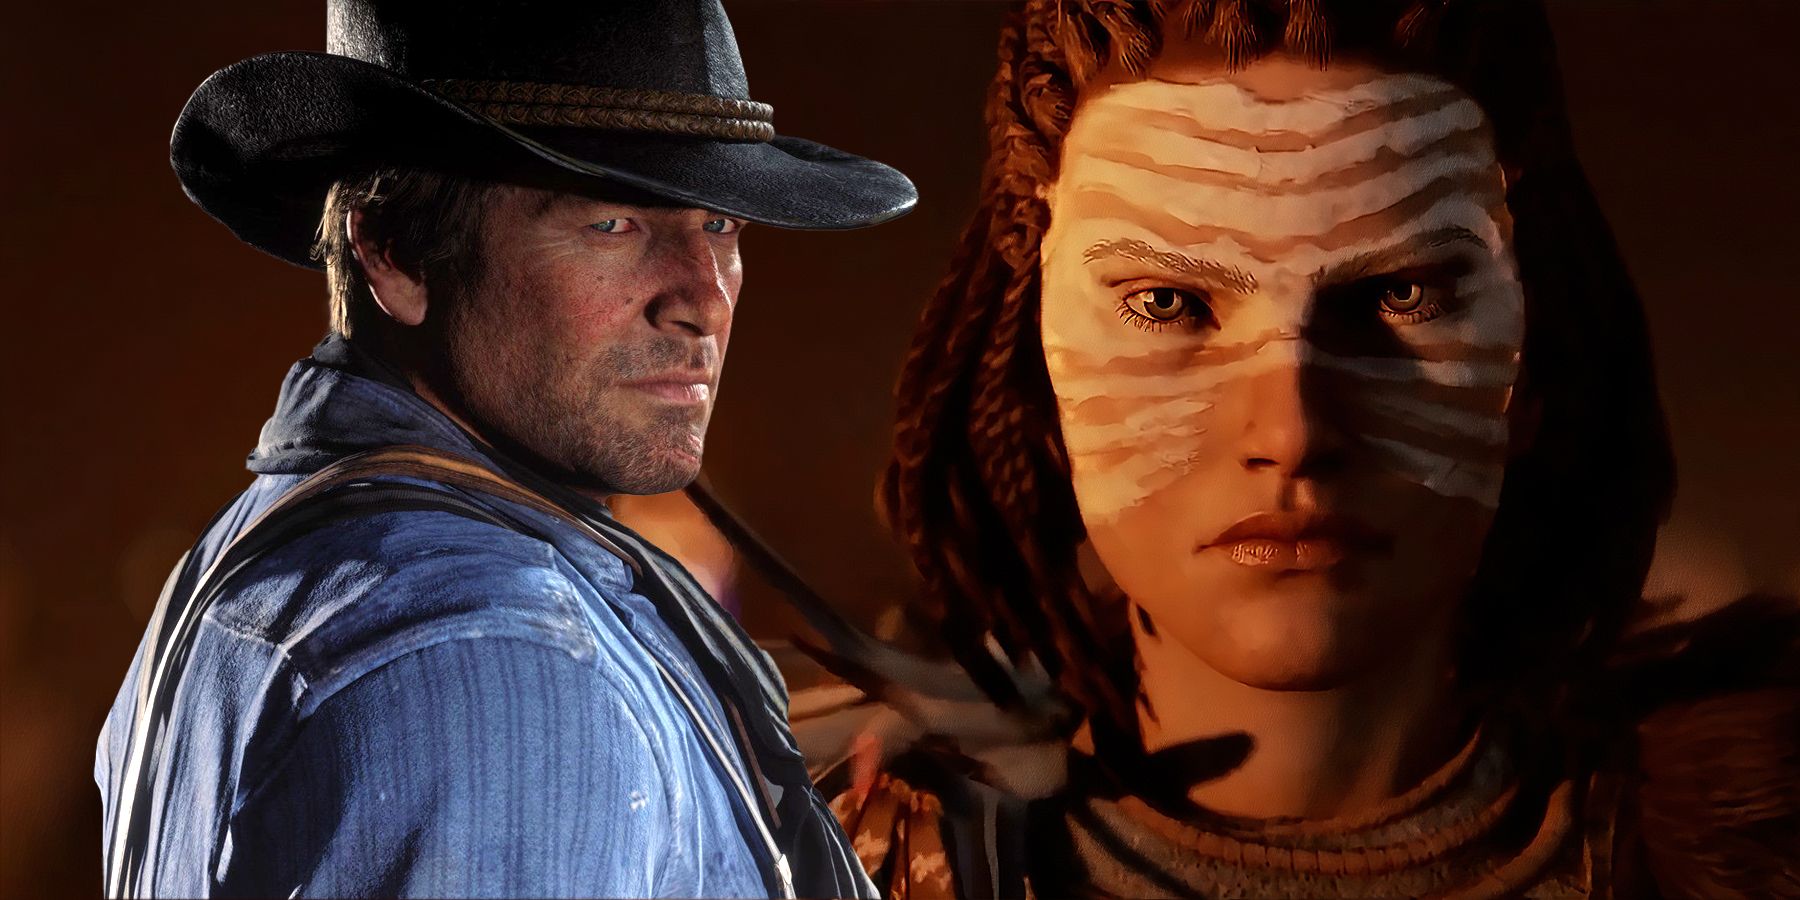 Red Dead Redemption 2's Arthur Morgan and GreedFall 2's protagonist